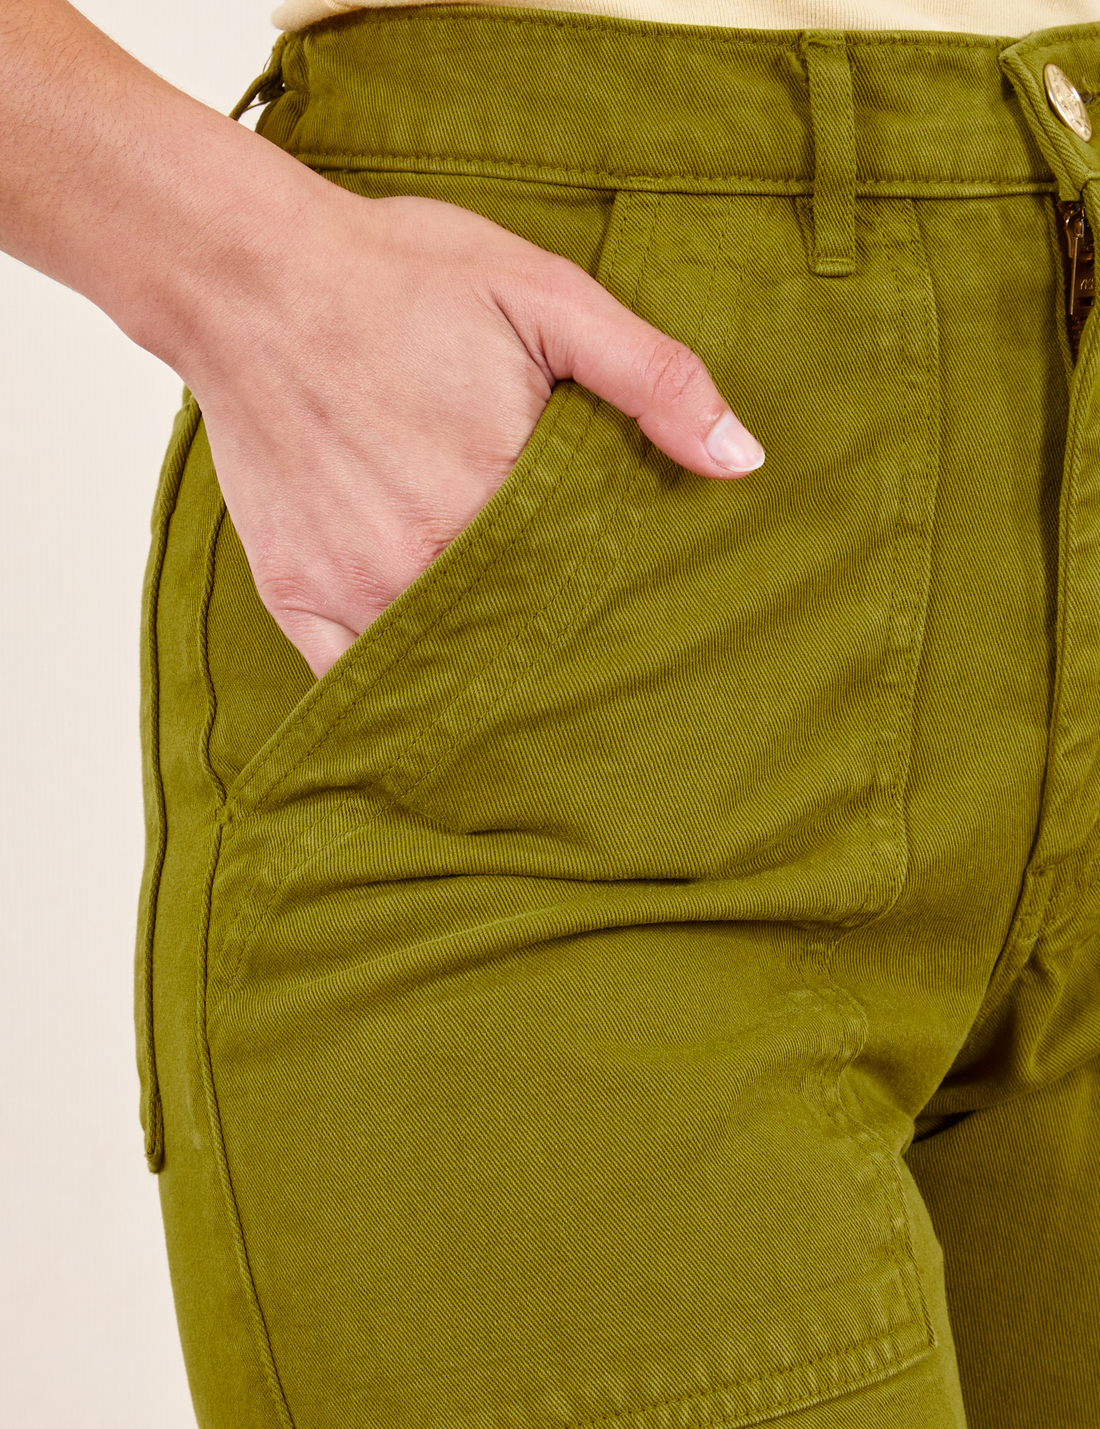 Front pocket close up of Work Pants in Olive Green. Worn by Soraya with her hand in the pocket.